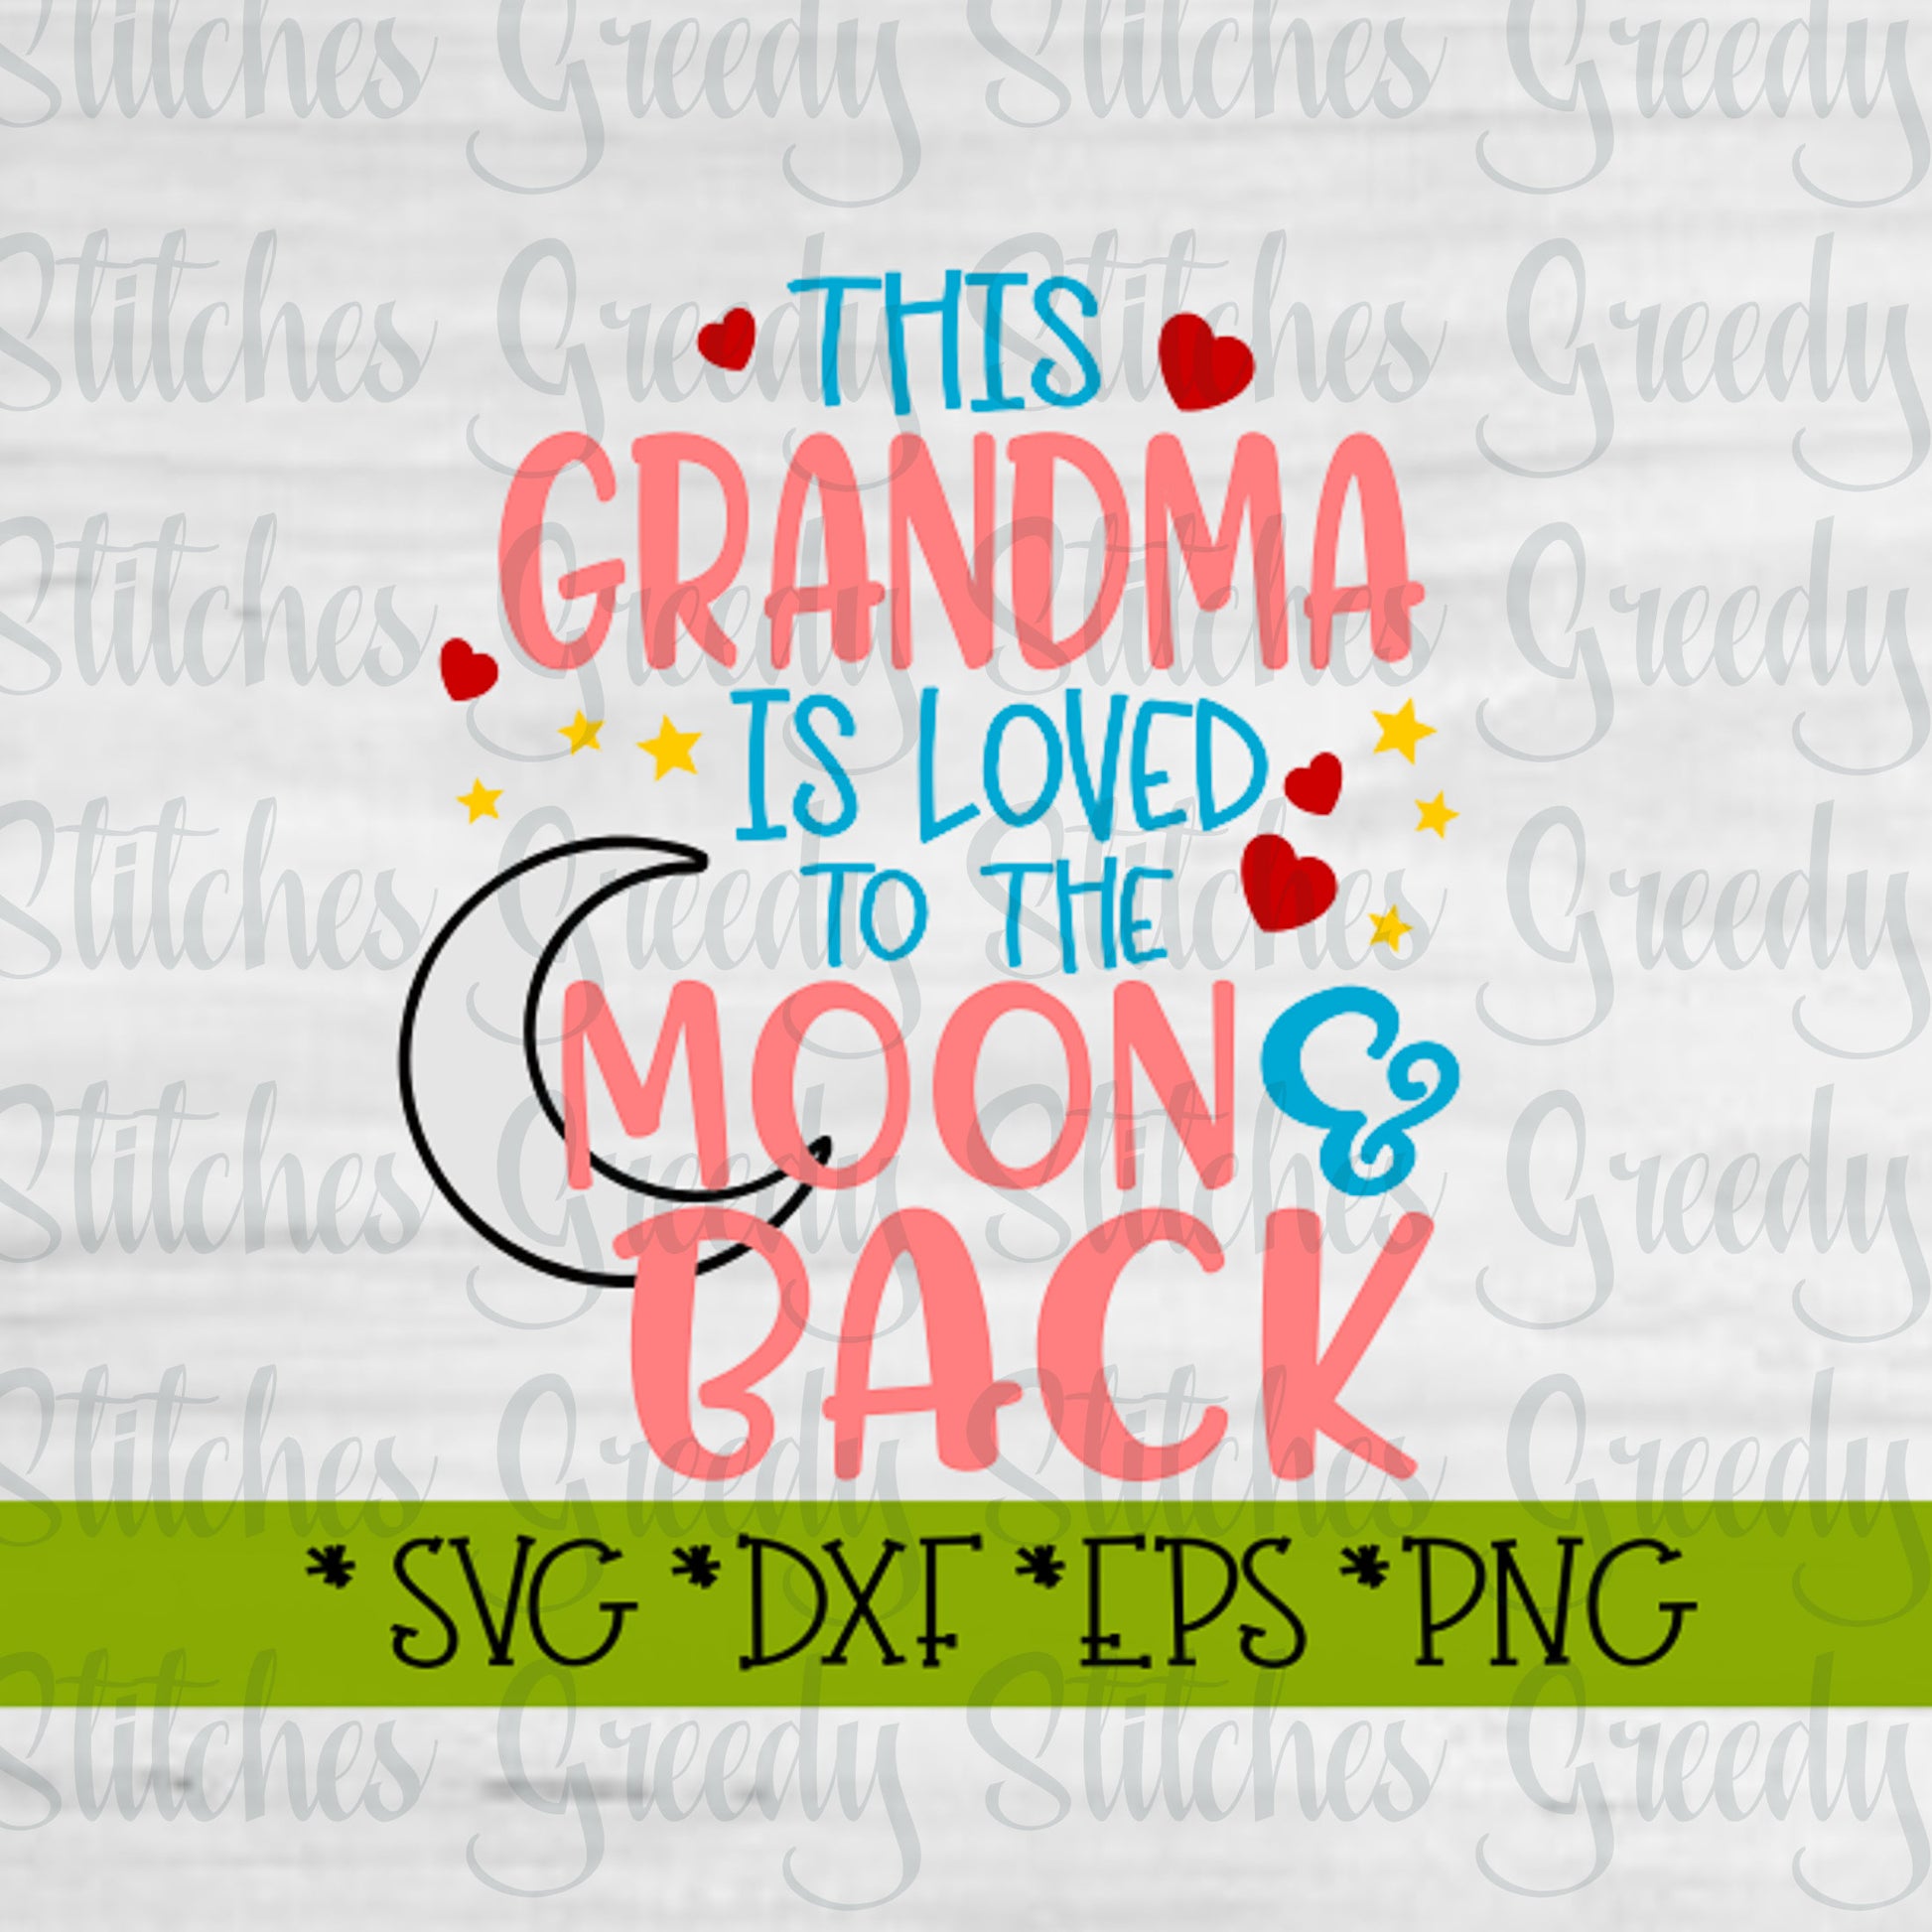 Mother&#39;s Day | This Grandma Is Loved To The Moon & Back svg, dxf, eps, png, wmf. Grandma SVG | Is Loved SVG | Instant Download Cut File